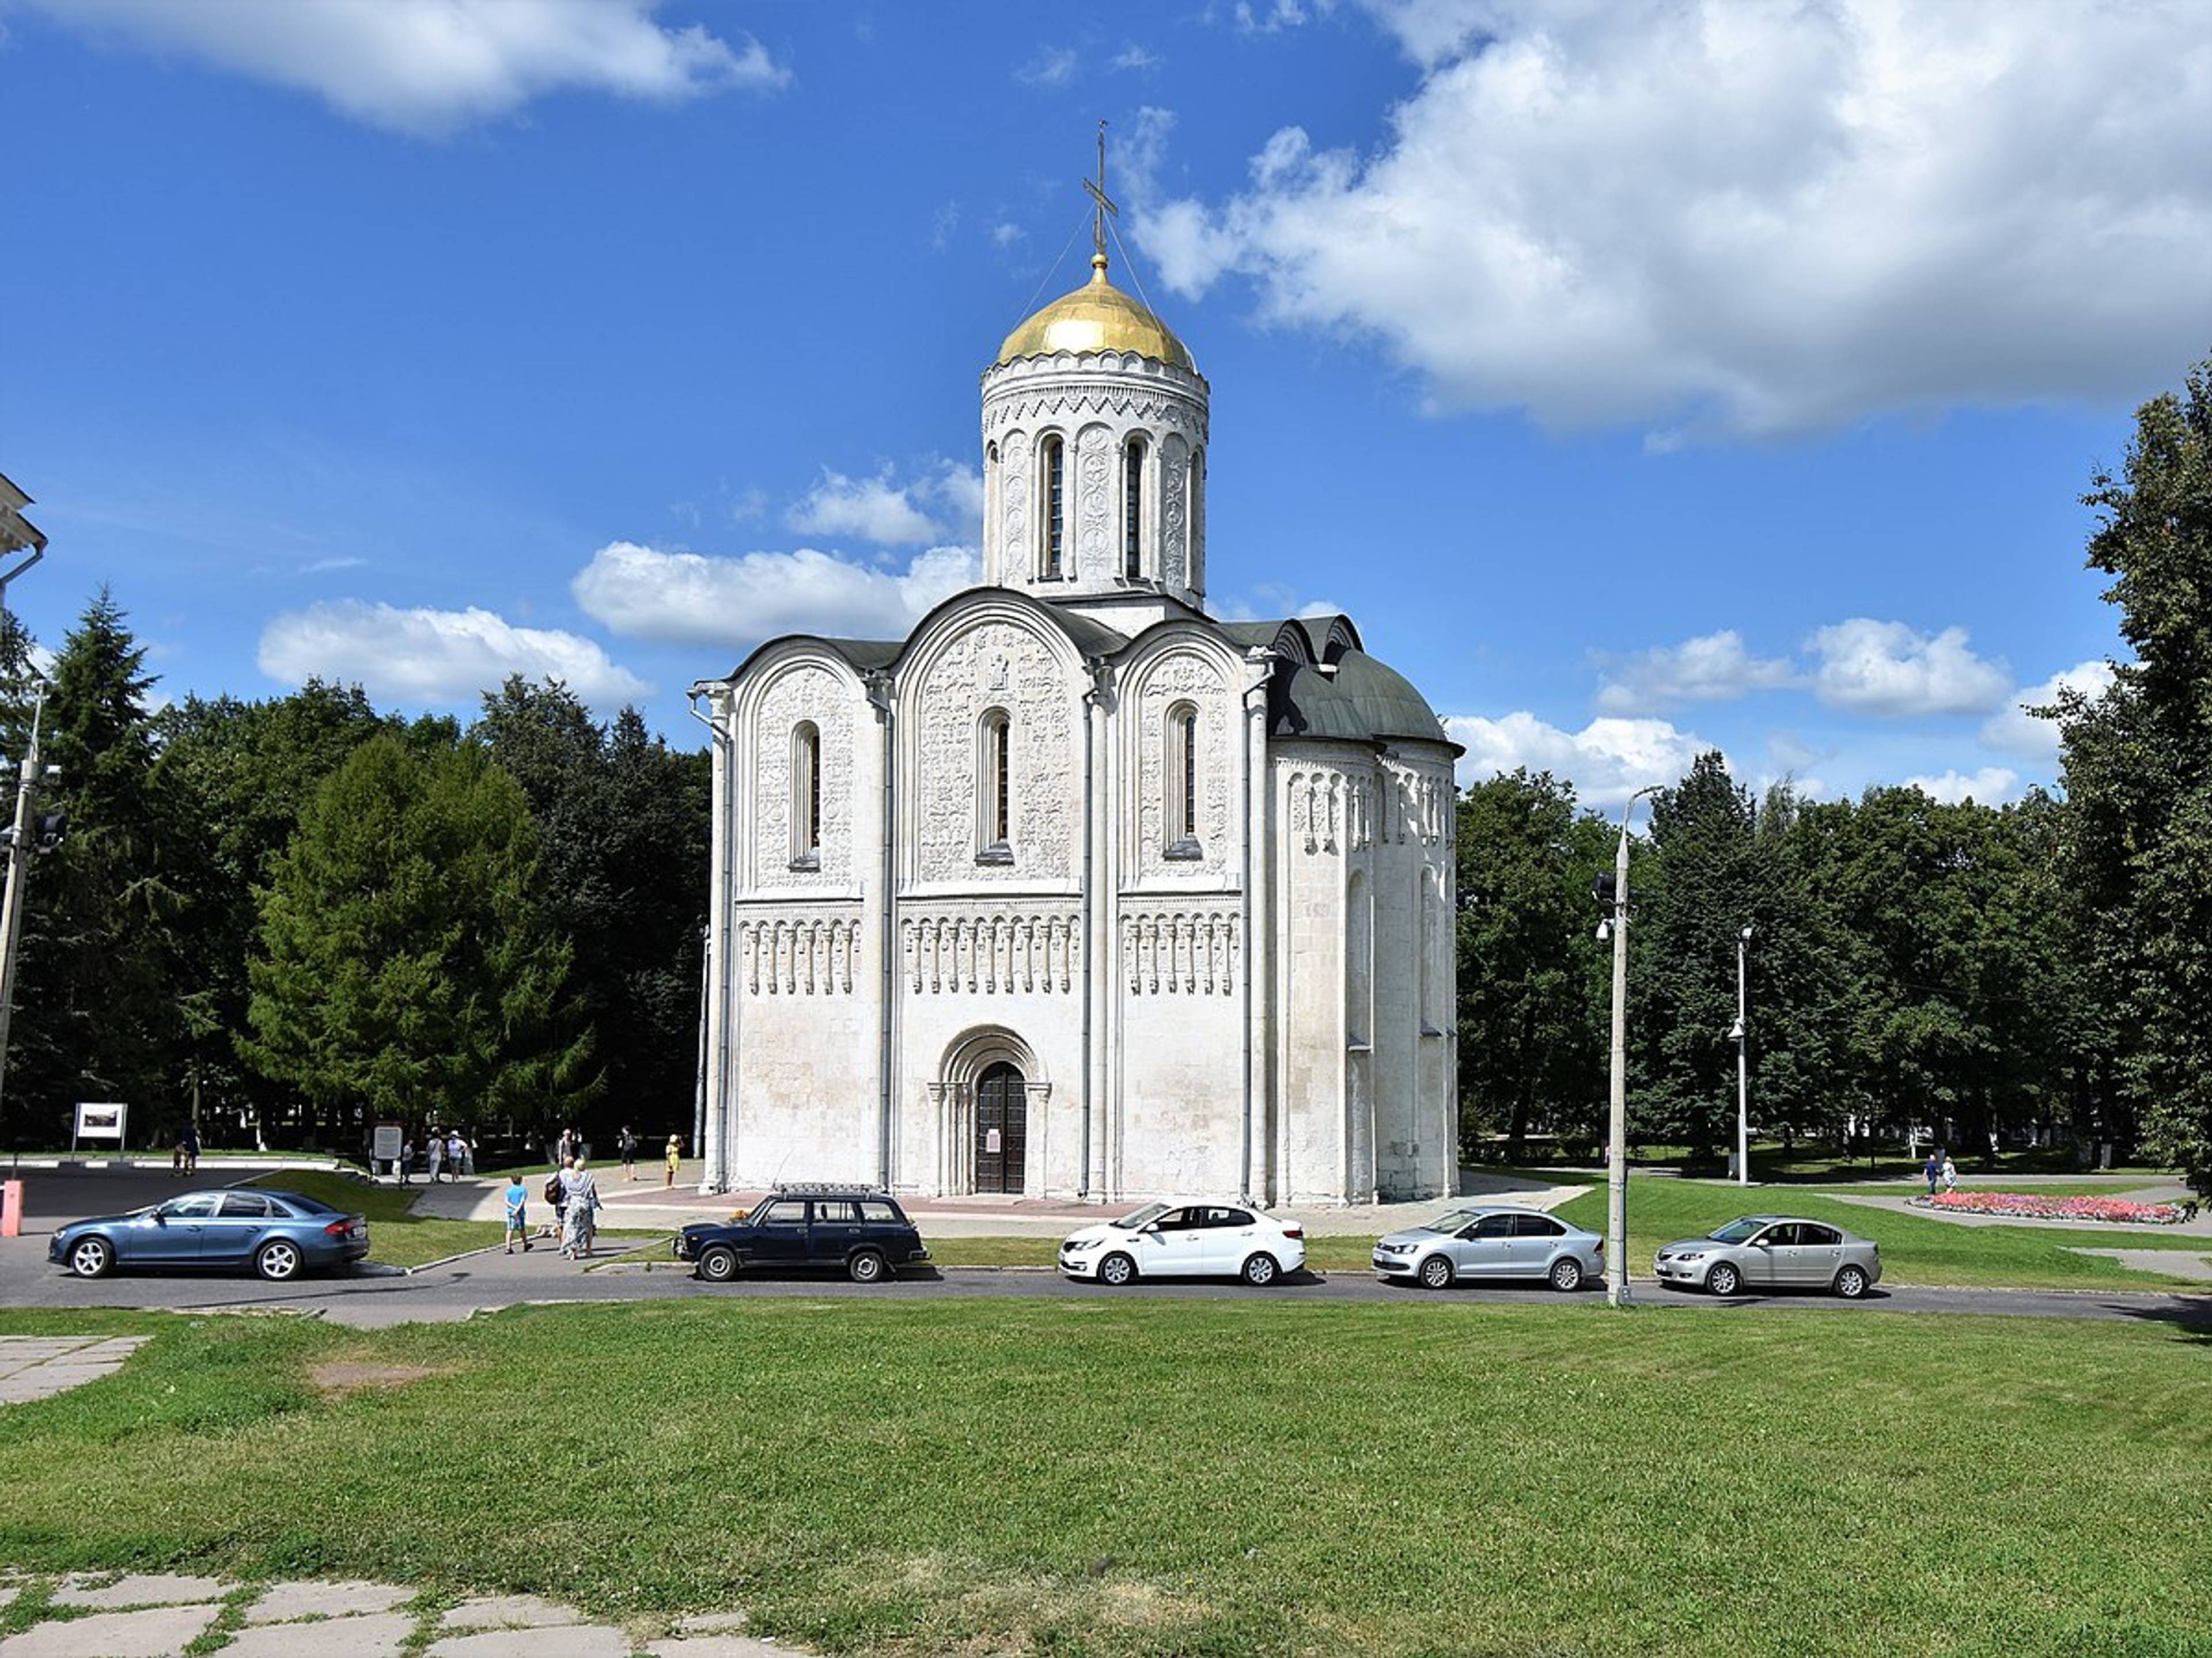 St. Cyril's Cathedral